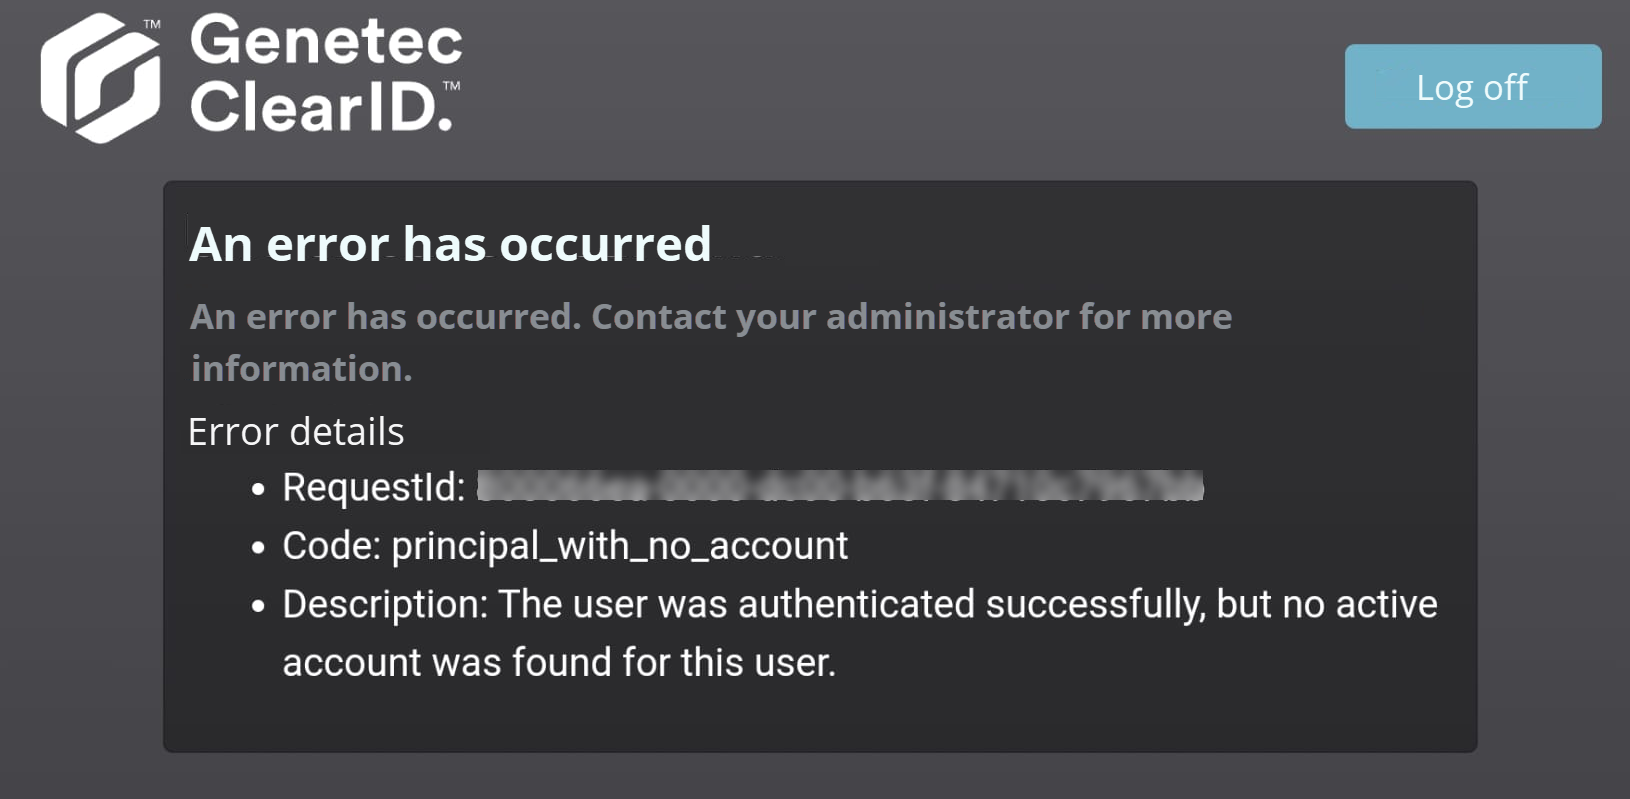 An error has occurred dialog in ClearID reporting that no active account was found for the user.